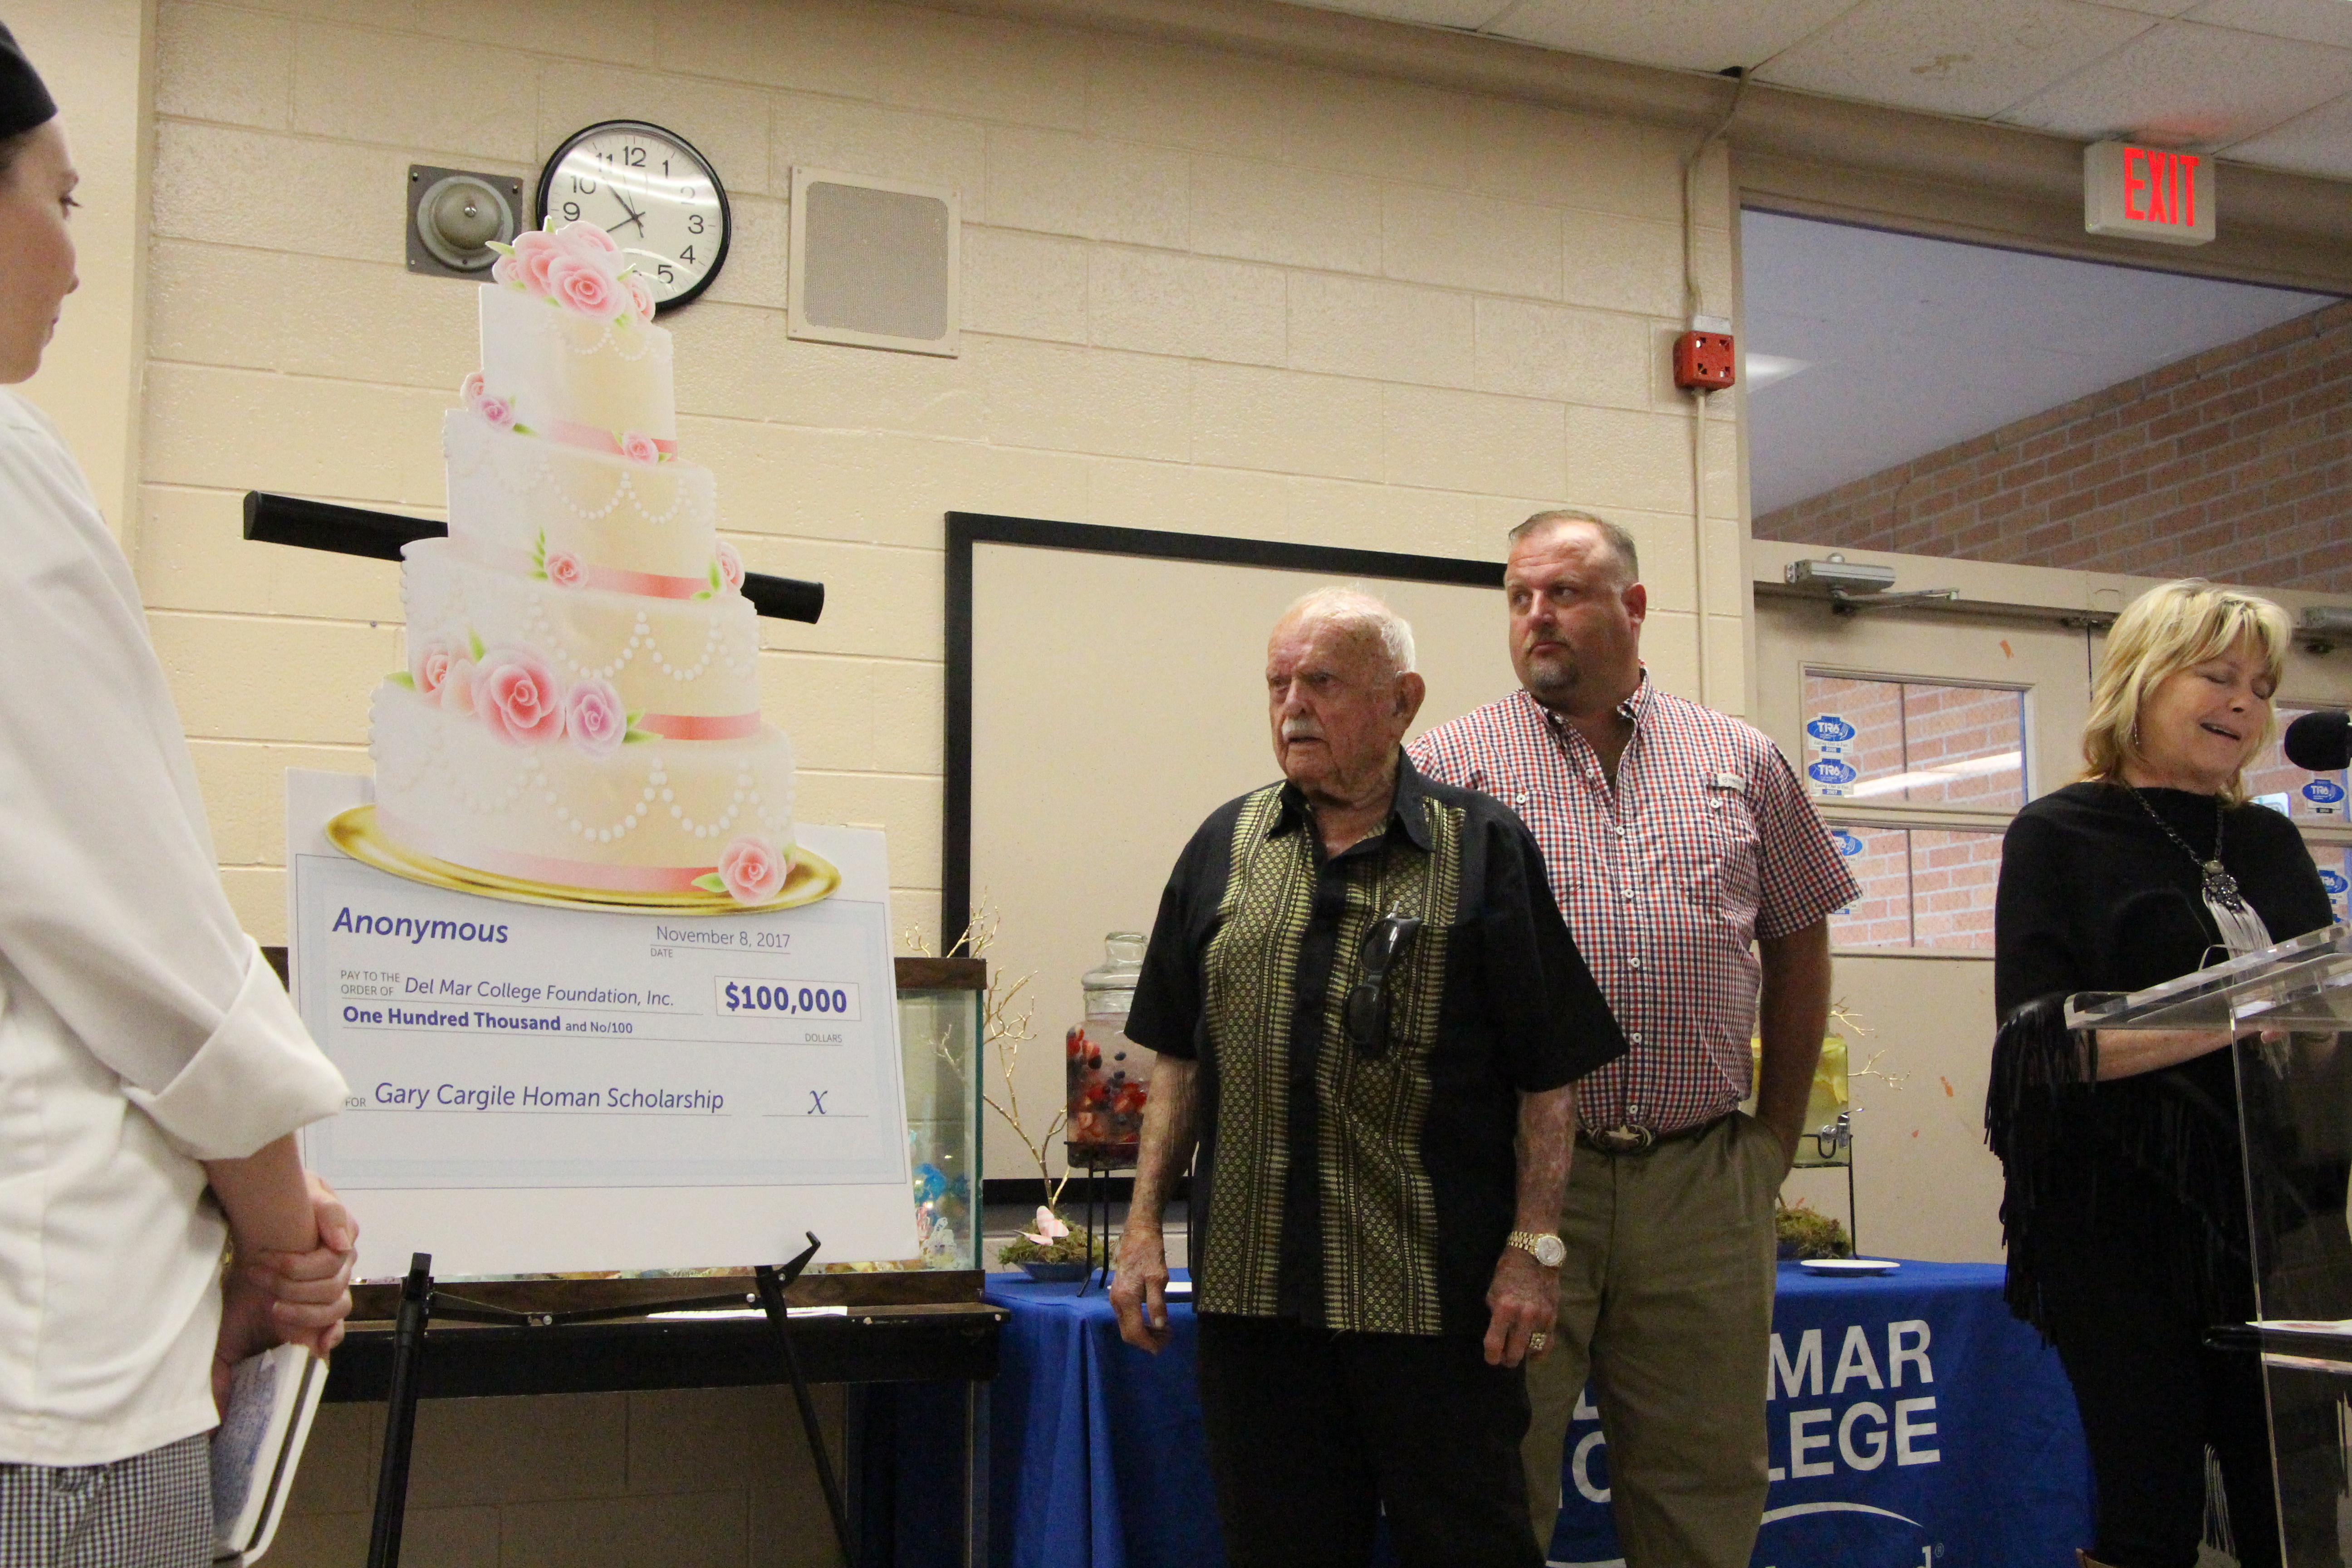 Gus Cargile (from left) and his grandson, Mike Homan, look on as Mary McQueen, with the DMC Foundation, announces a $100,000 donation made in honor of Gus' daughter and Mike's Mom, Gary Homan, on Nov. 15 at West Campus.